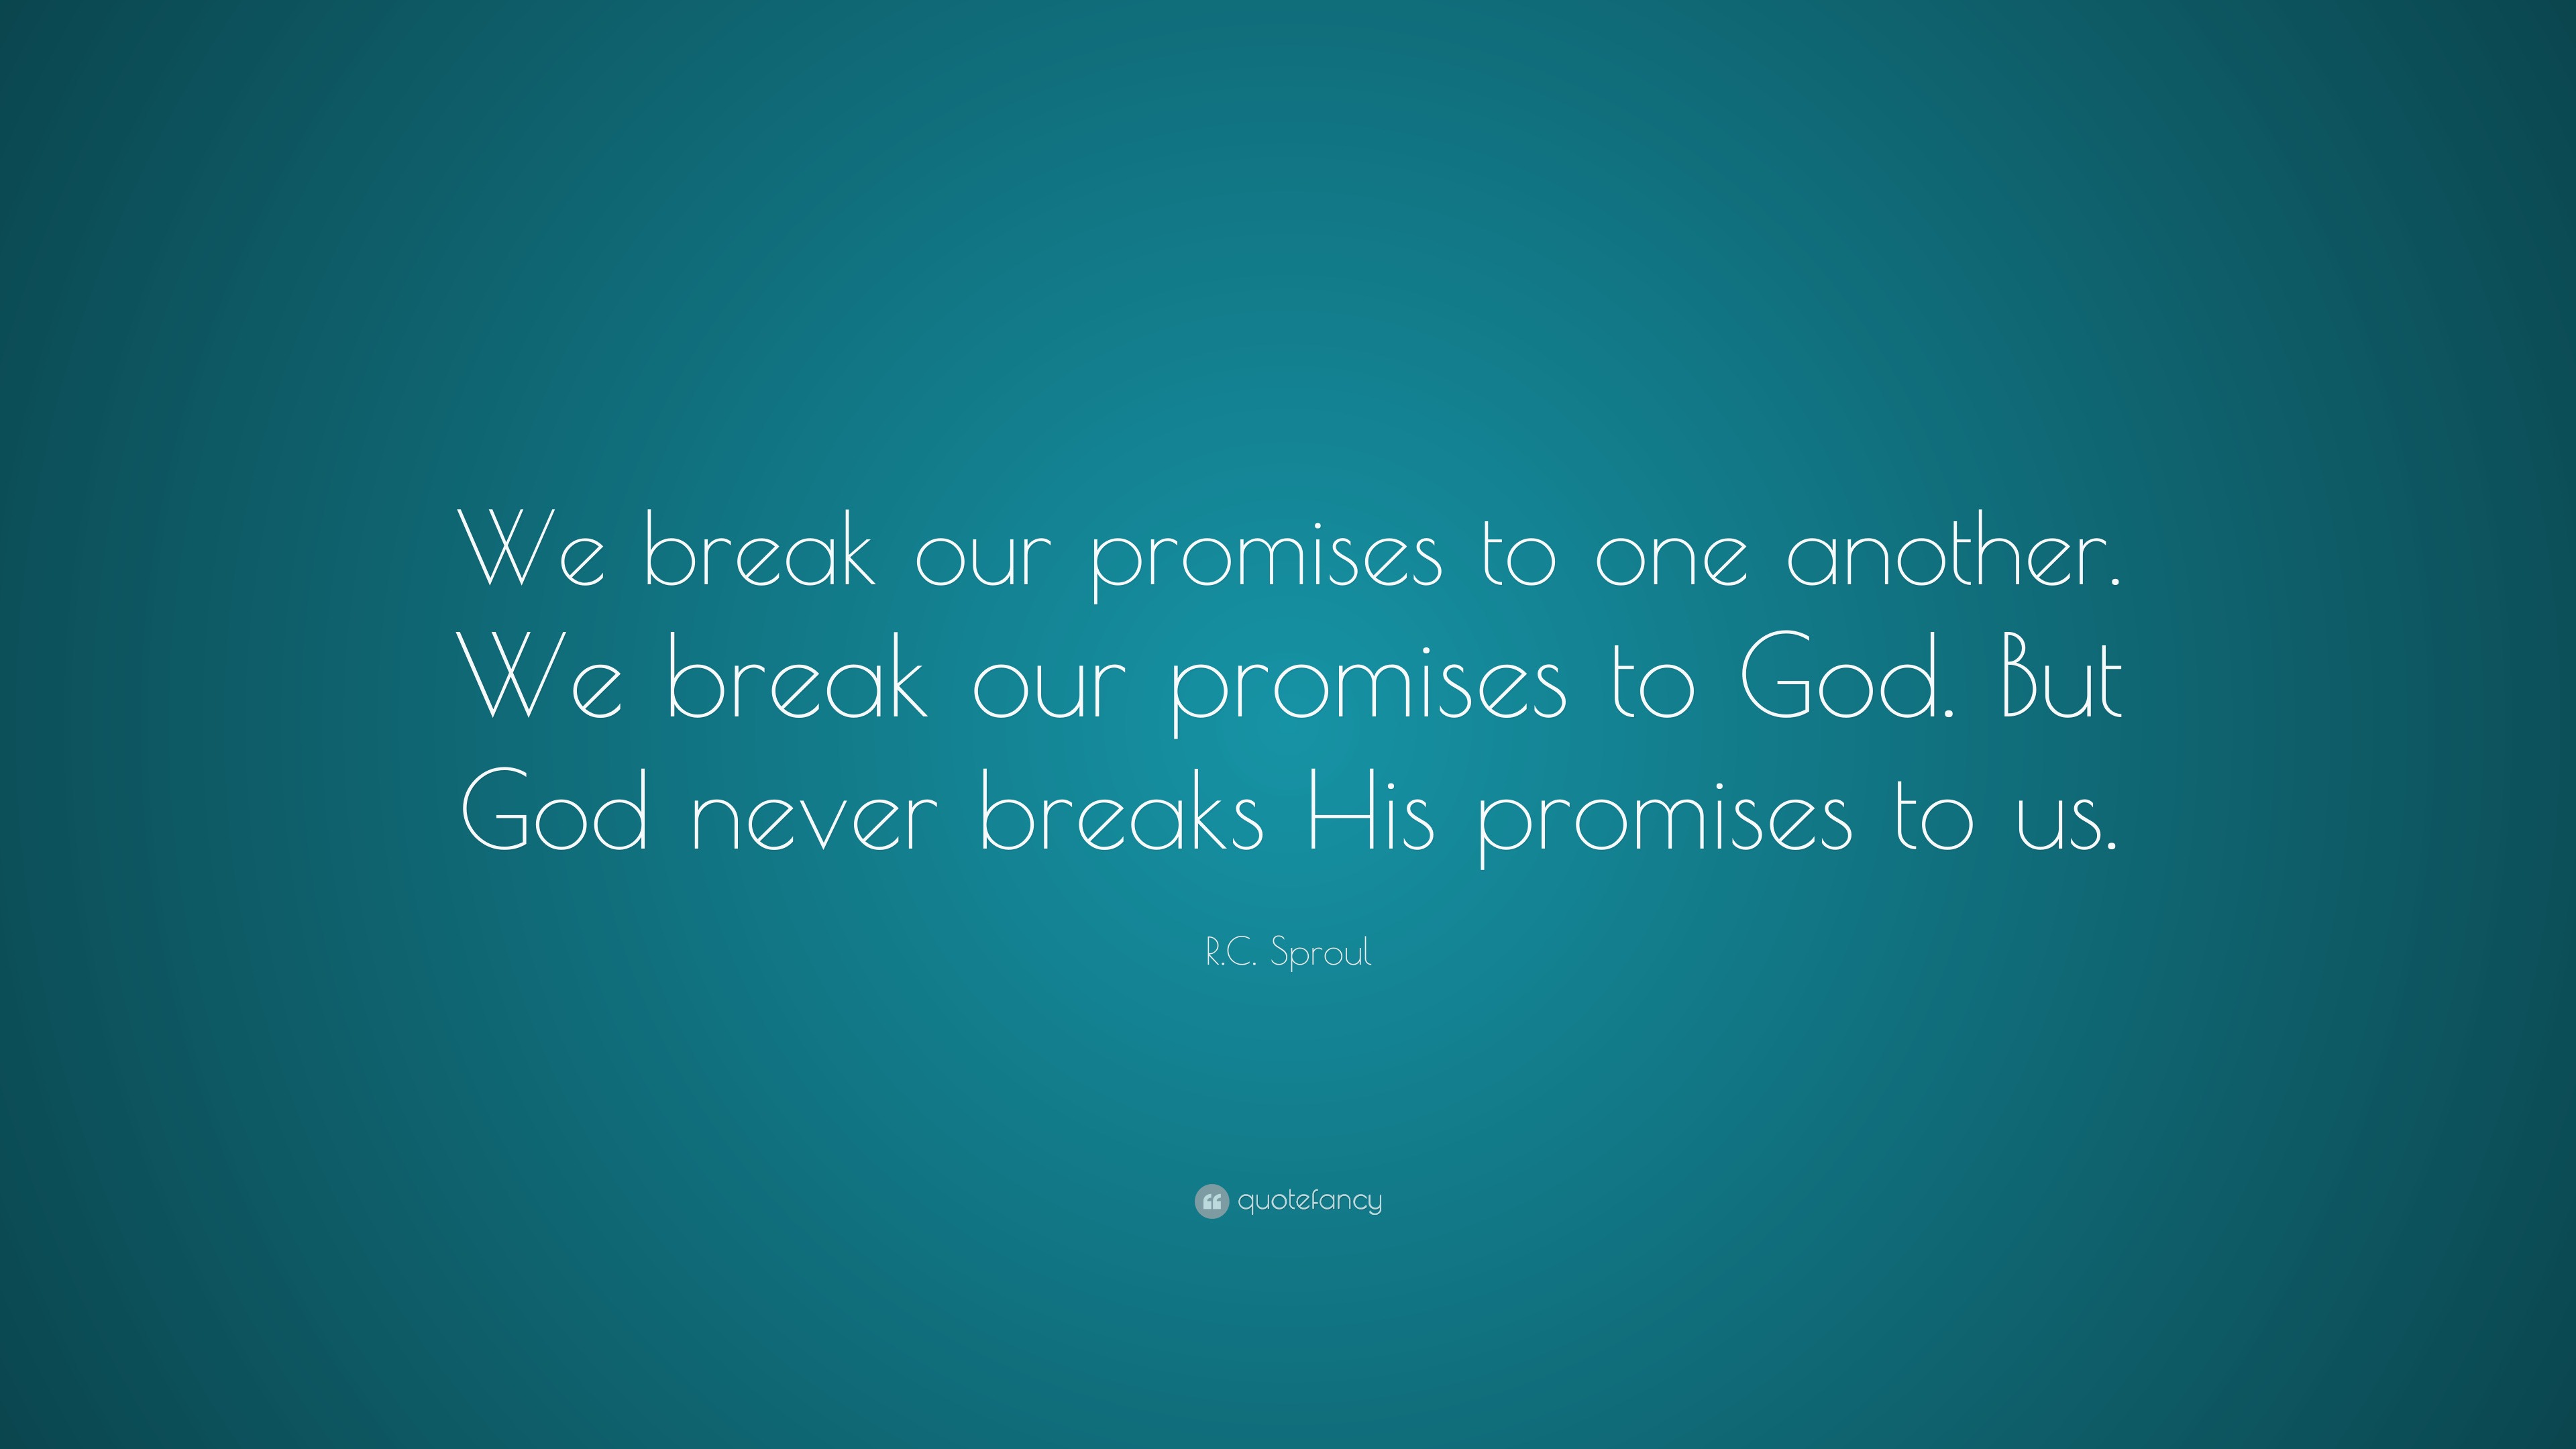 Our promises